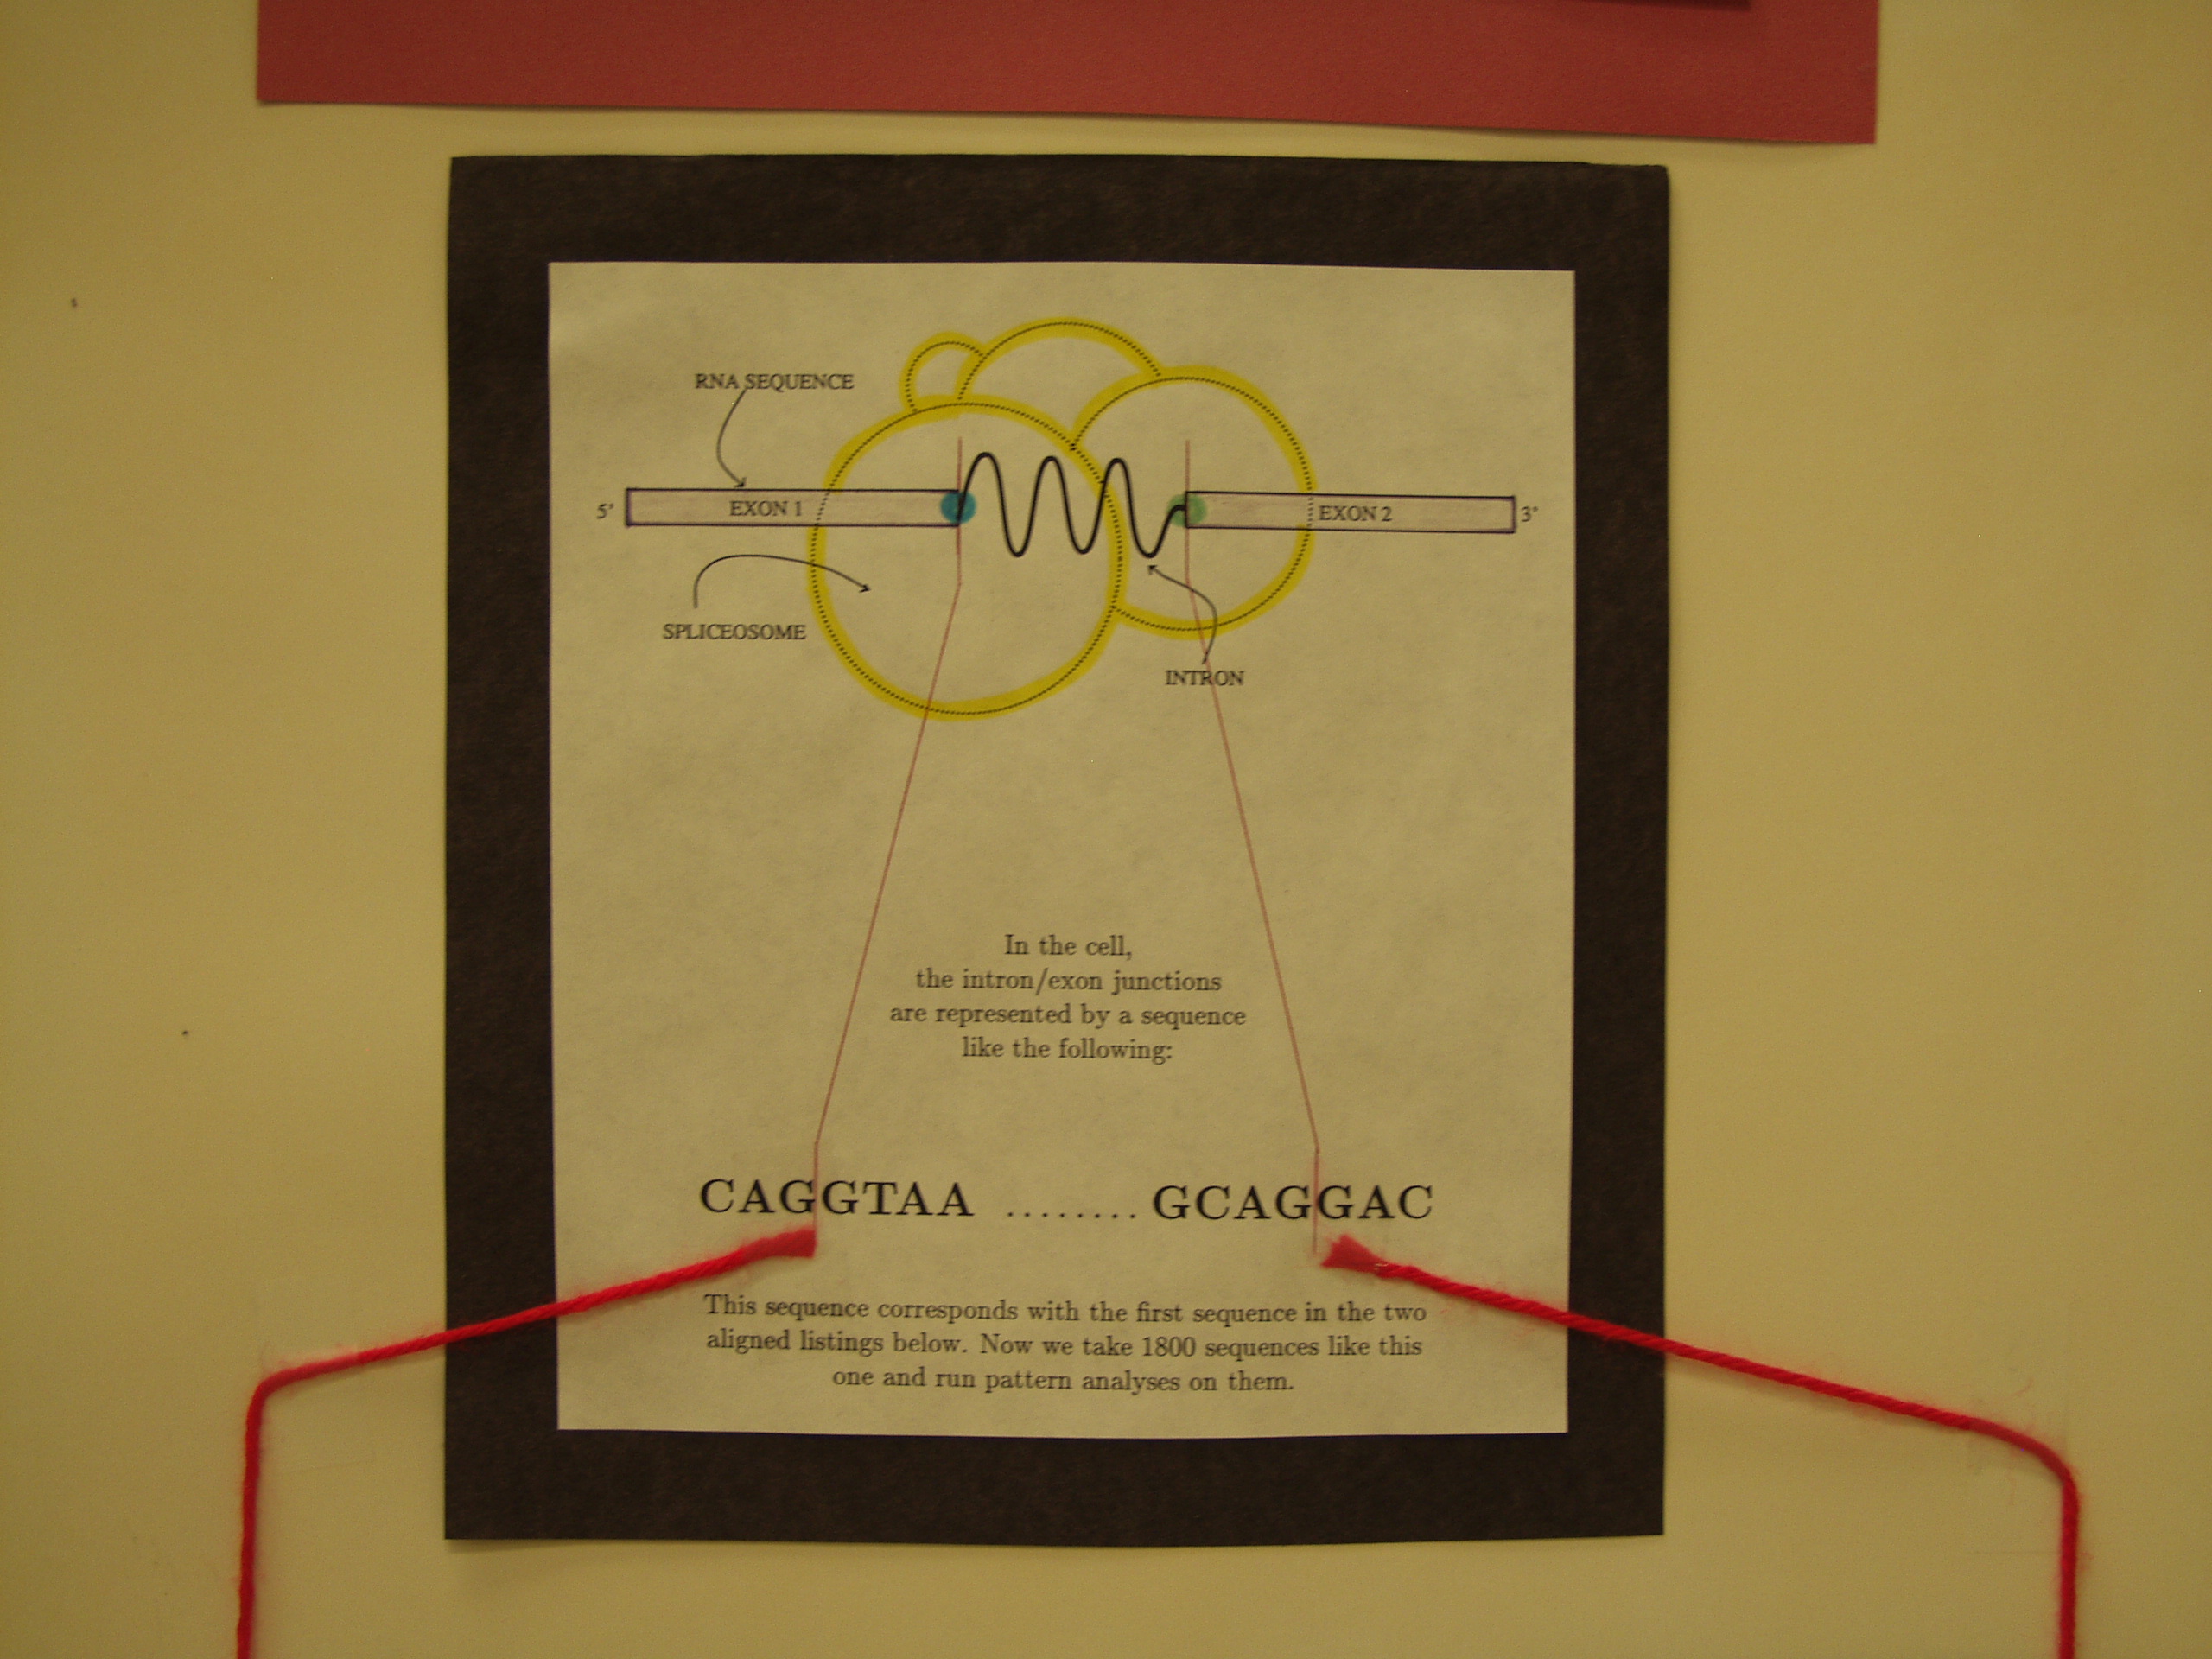 P8237794.JPG Photograph of Mike Stephen's 1990 science fair poster 'Information analysis of RNA splice sites'